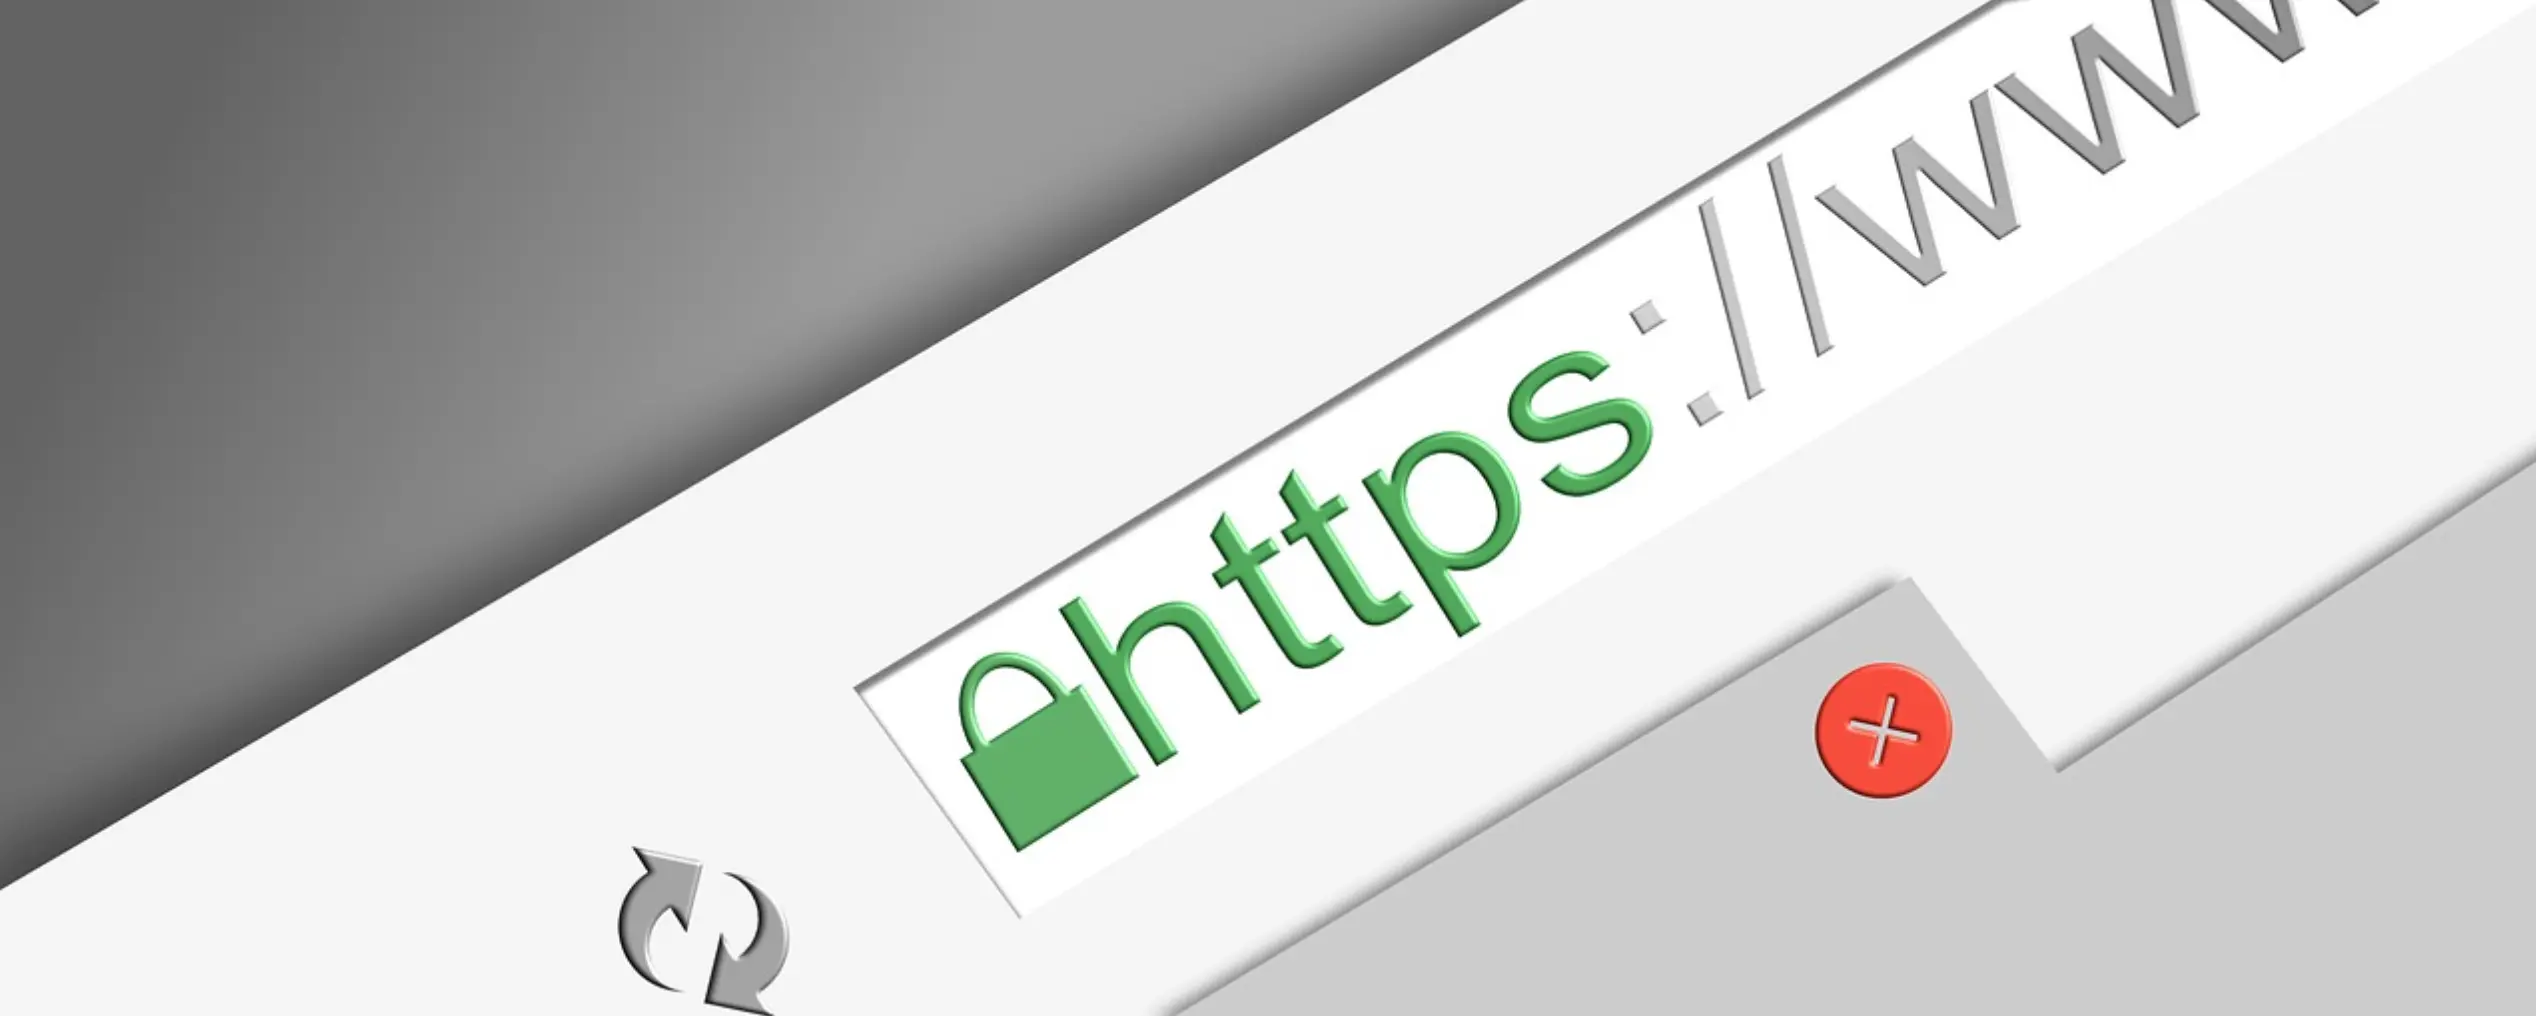 SSL certificates provide data protection for online businesses.